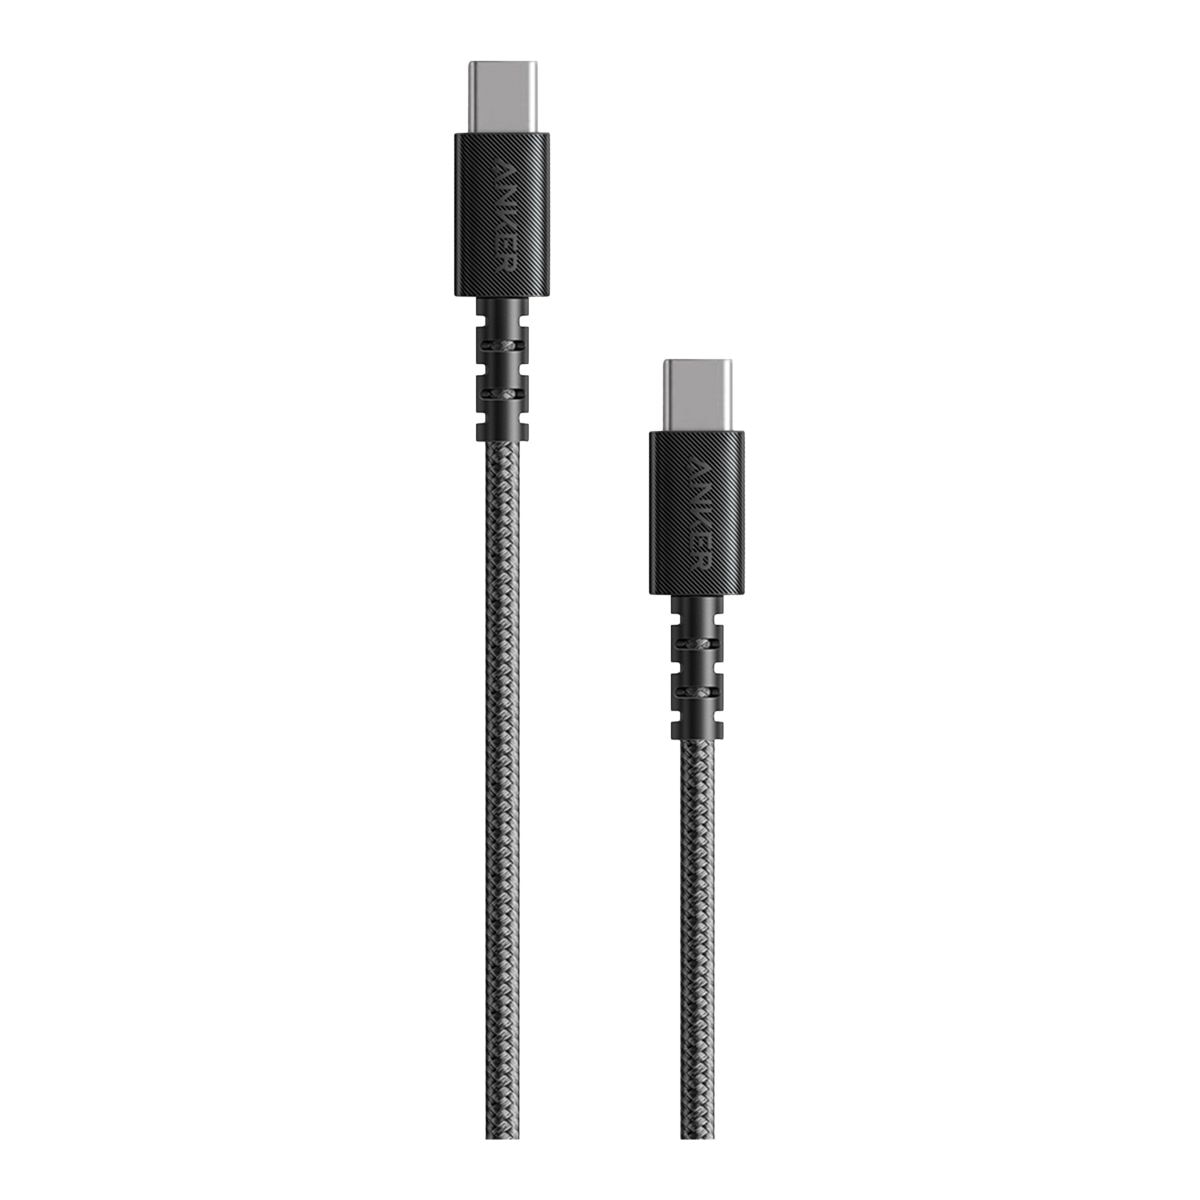 Anker PowerLine Select+ USB C to USB C Foot Cable